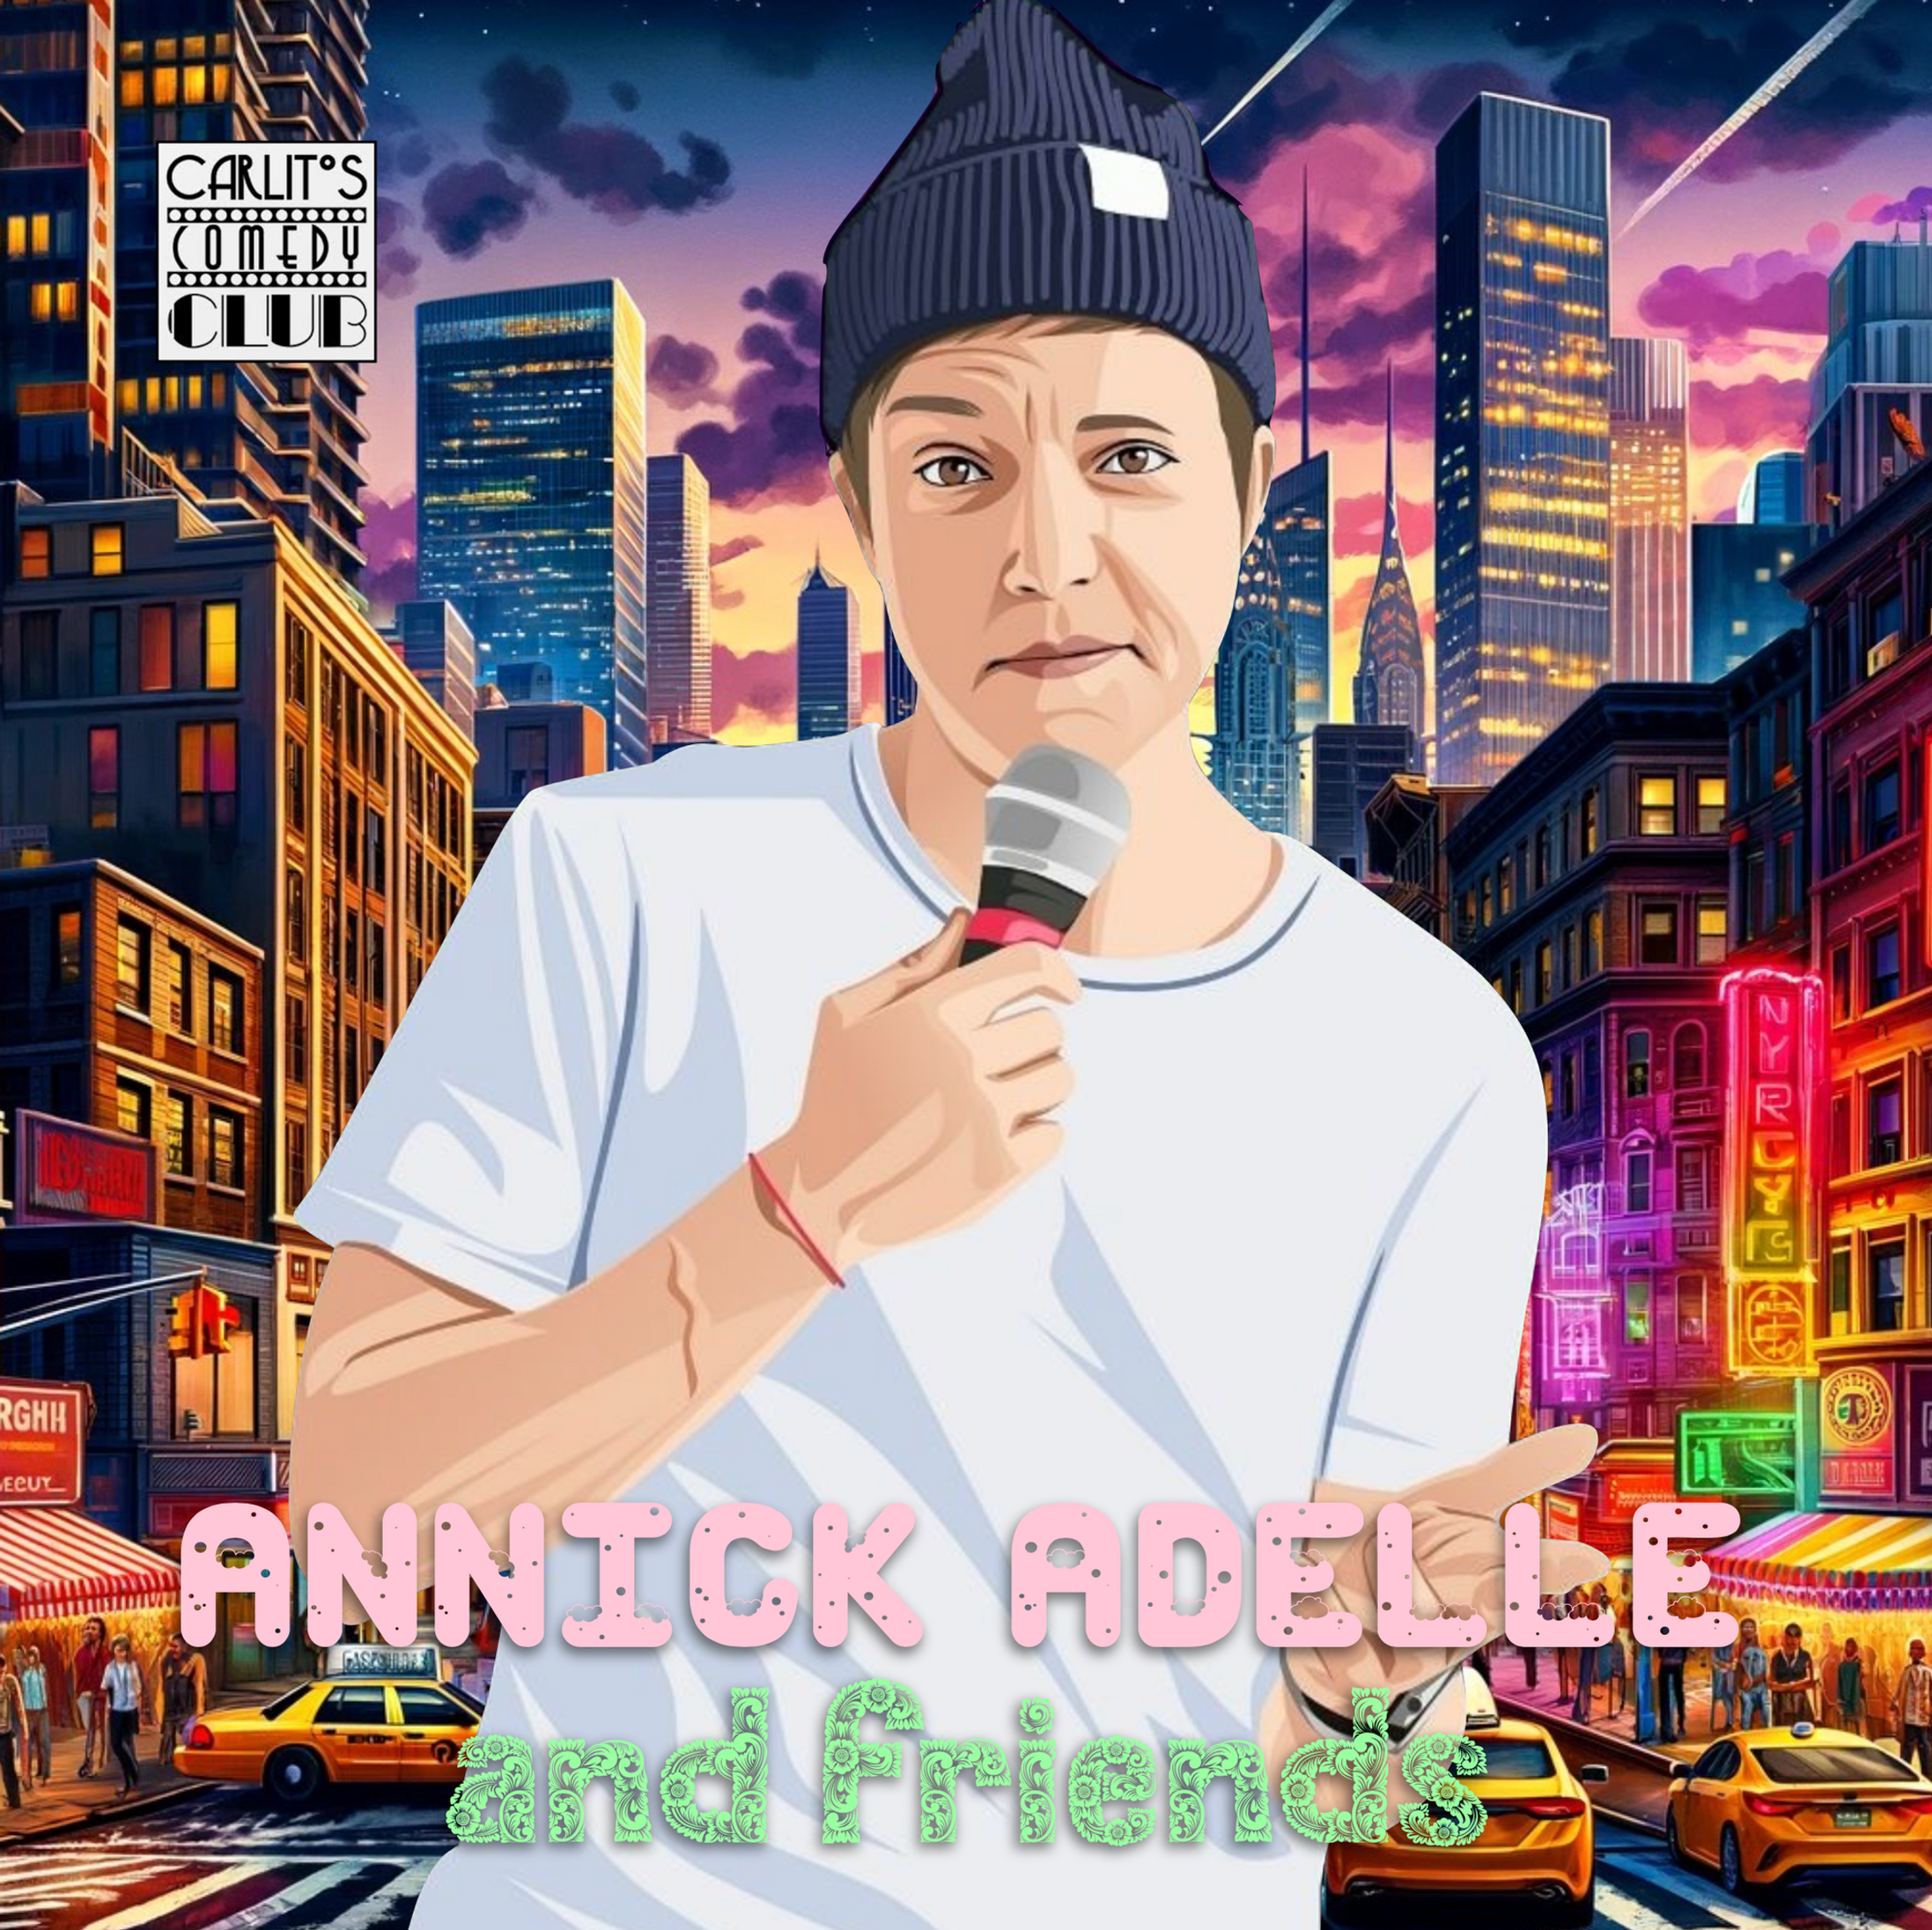 Annick Adelle and friends - English Stand-up comedy